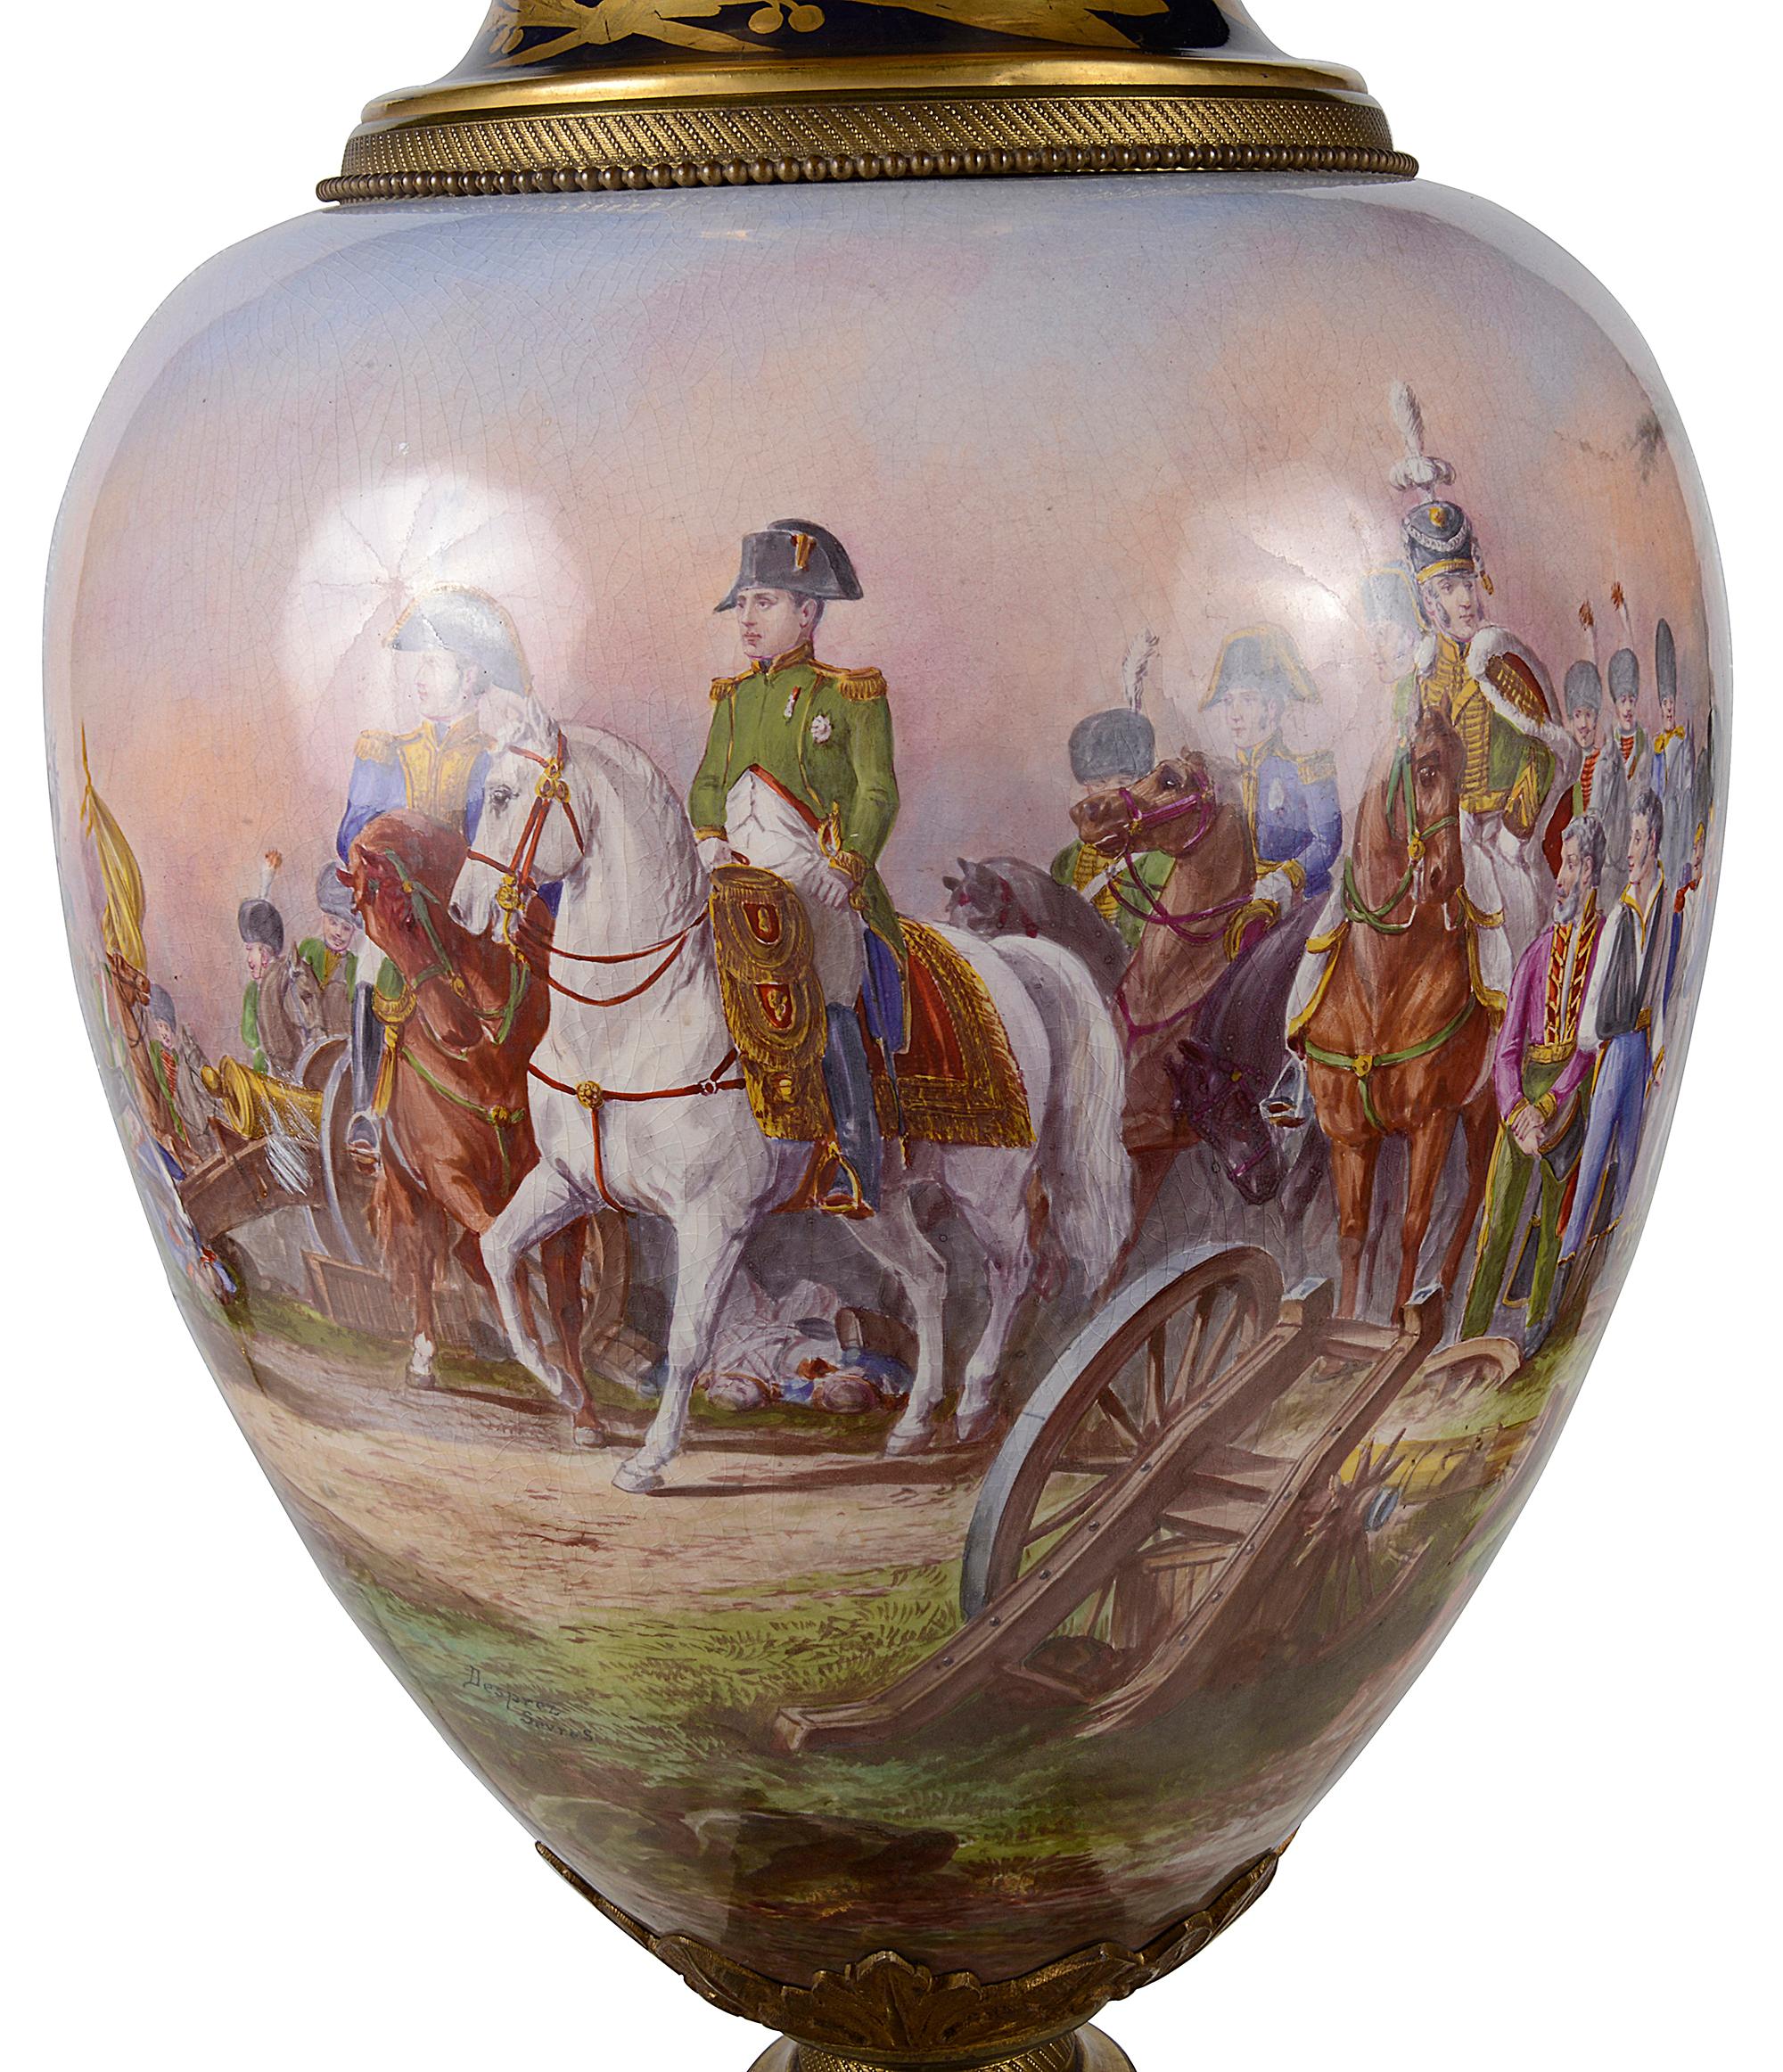 A wonderfully impressive late 19th century French Sevres style porcelain lidded vase, Cobalt blue ground with classical gilded motif decoration. Gilded ormolu finial, moulding and base. 
A wonderful hand painted scene of Napoleon on horse back in